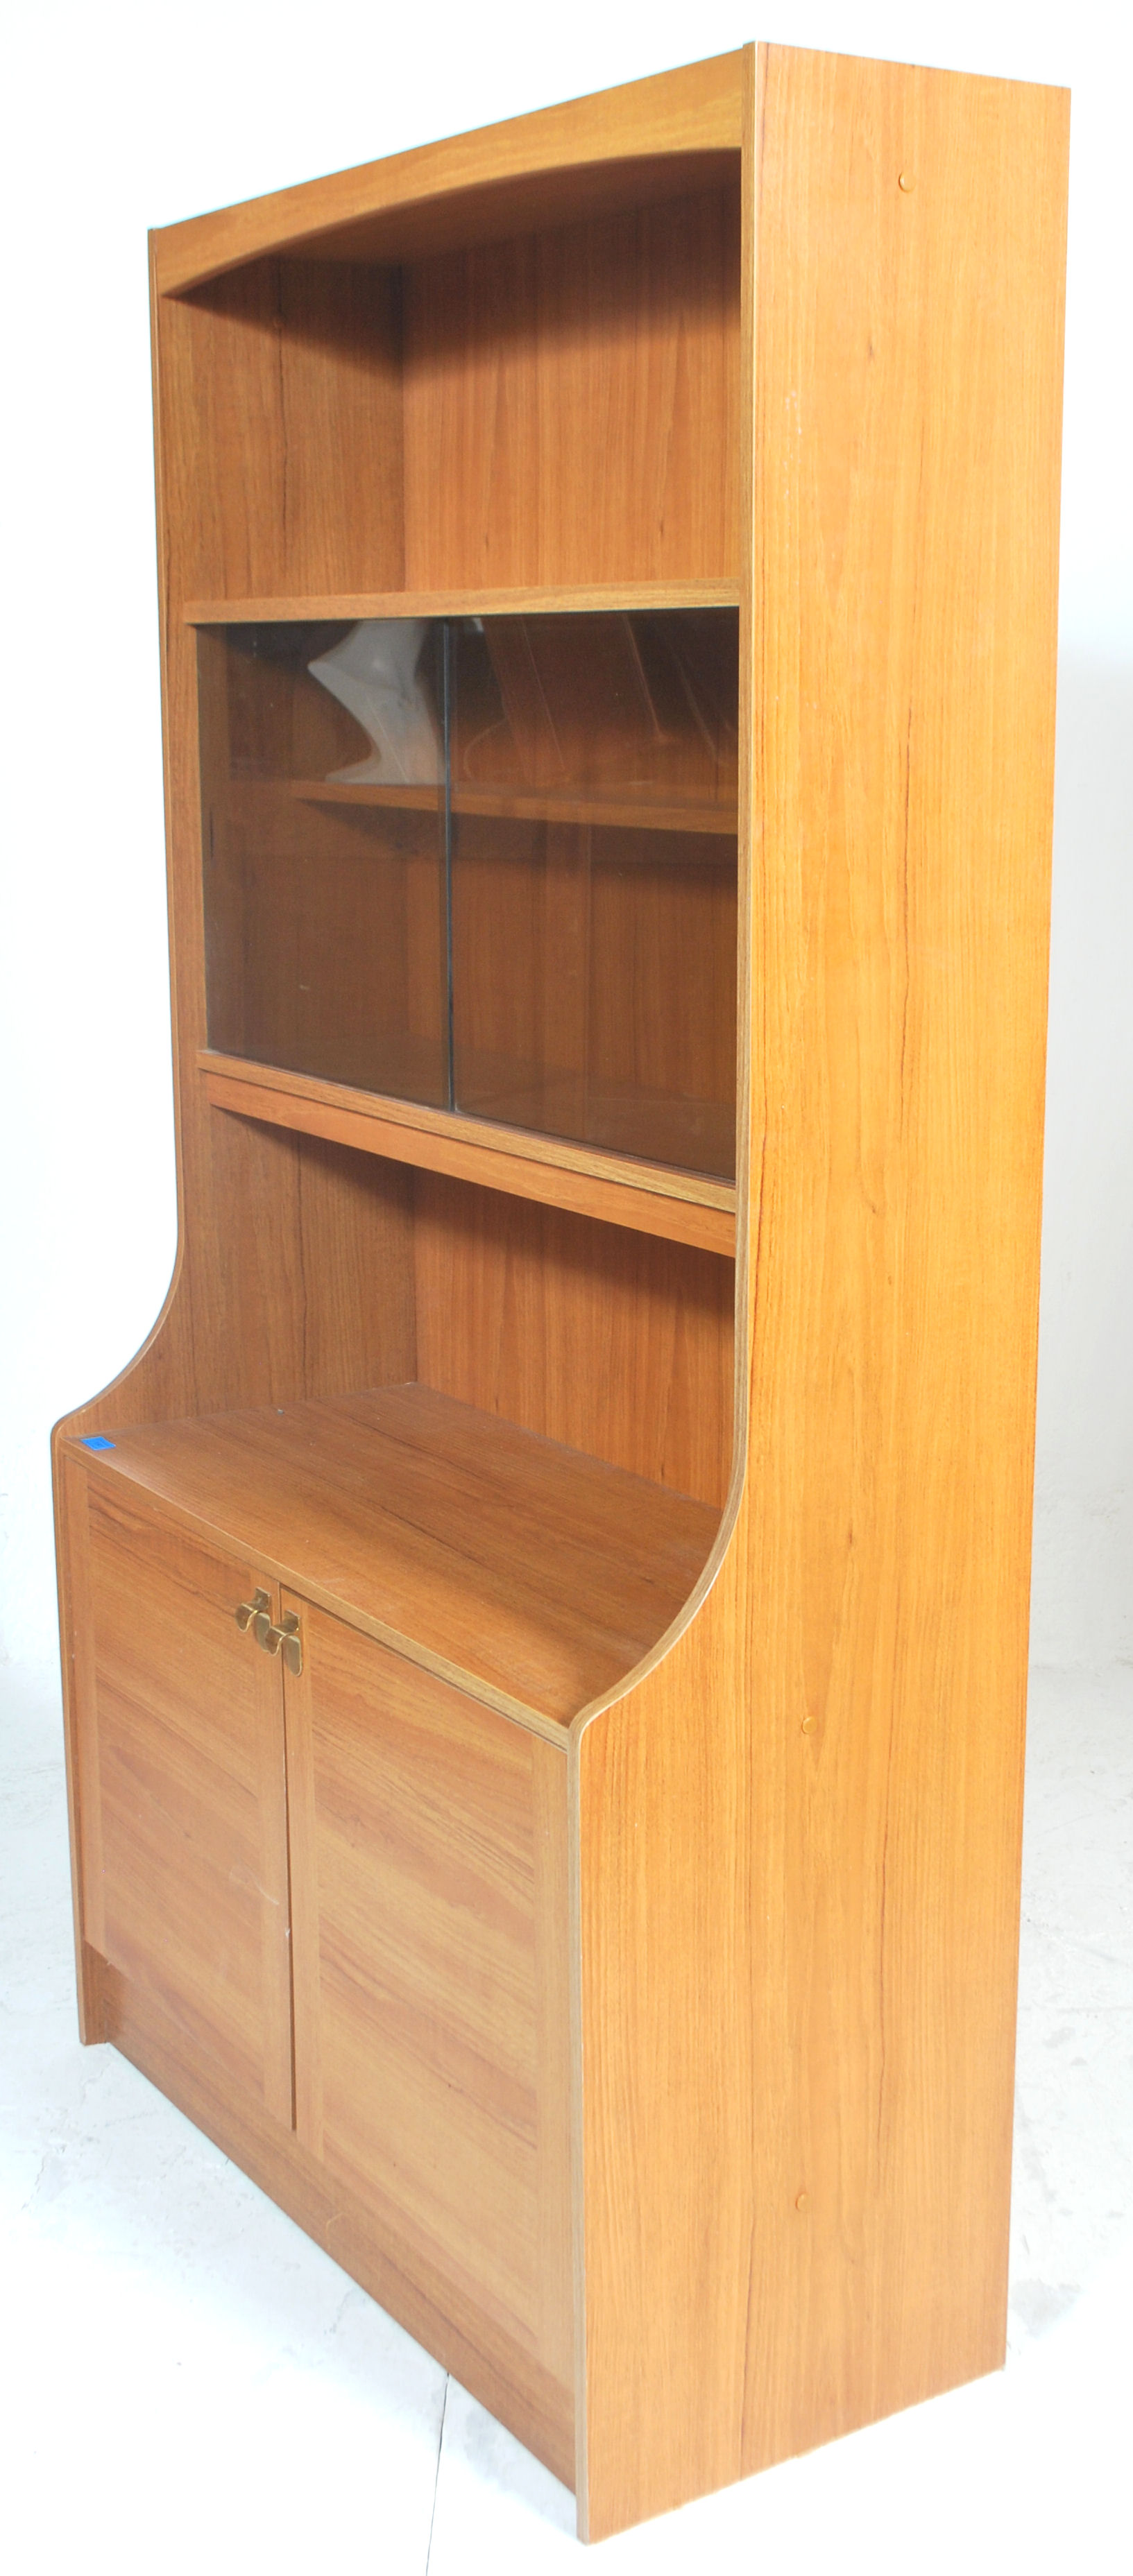 A retro 20th century teak wood veneer  room divider - bookcase cabinet. The upright body with - Image 5 of 5